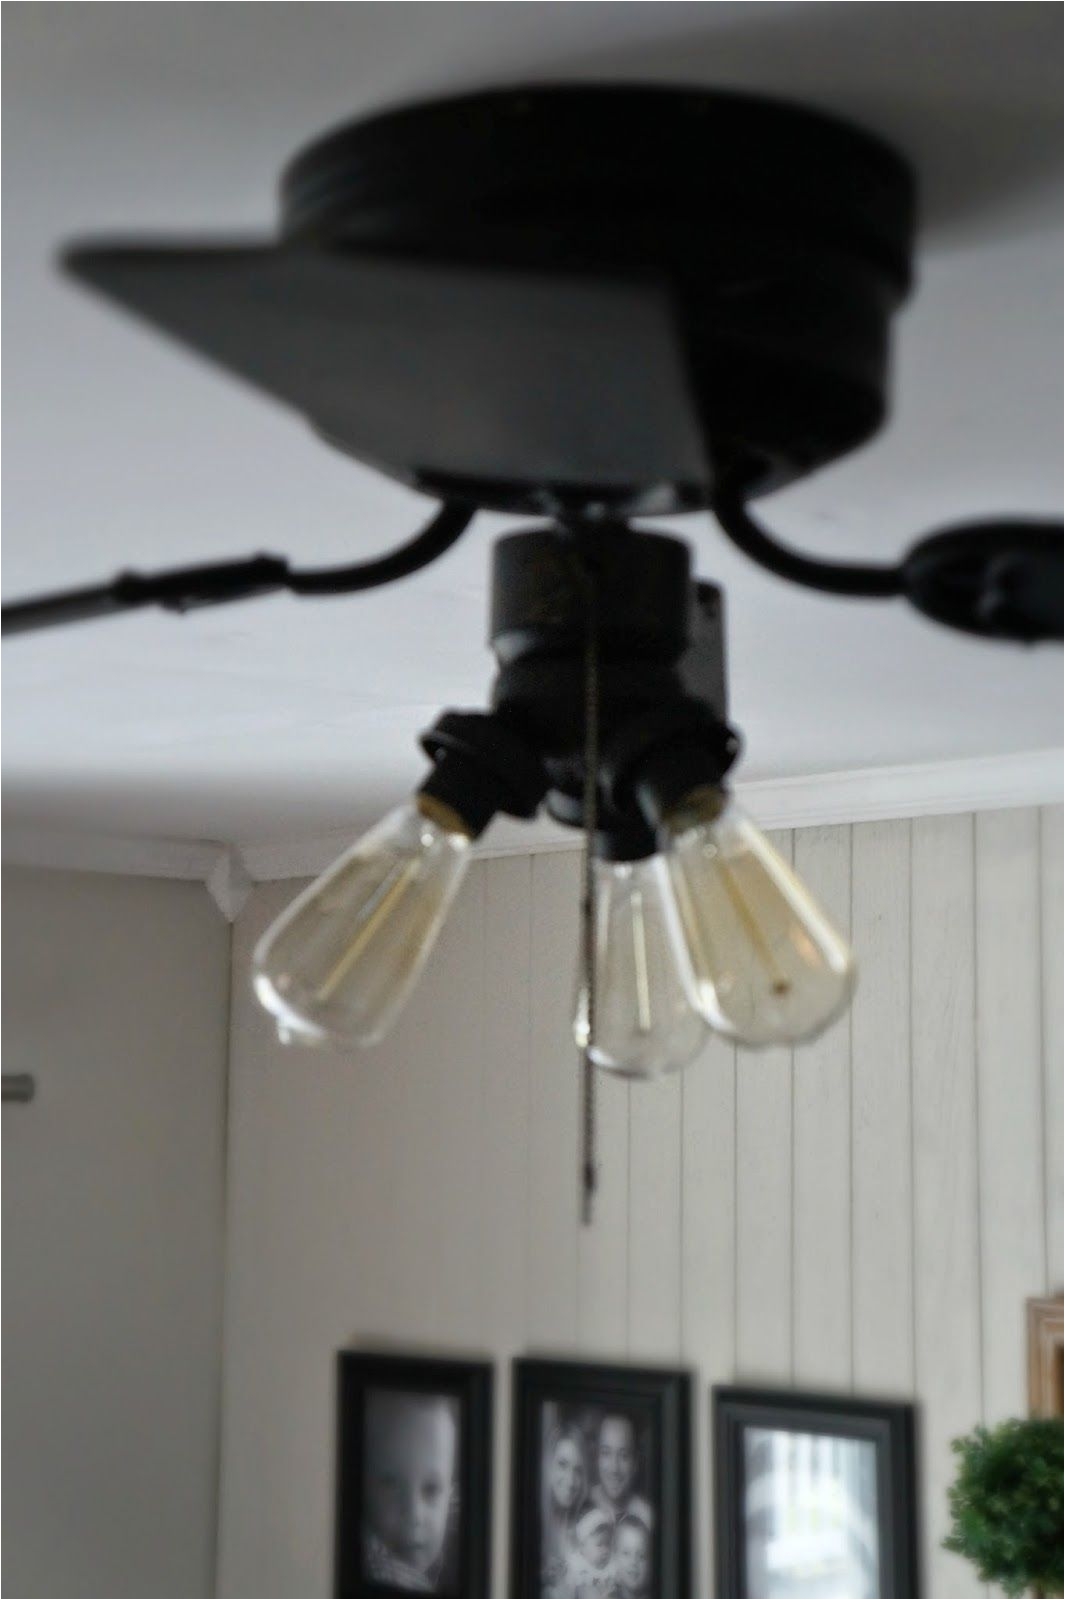 easy ceiling fan makeover looks great however i just read that edison bulbs are very inefficient dont put out much light compared to cfl counterparts